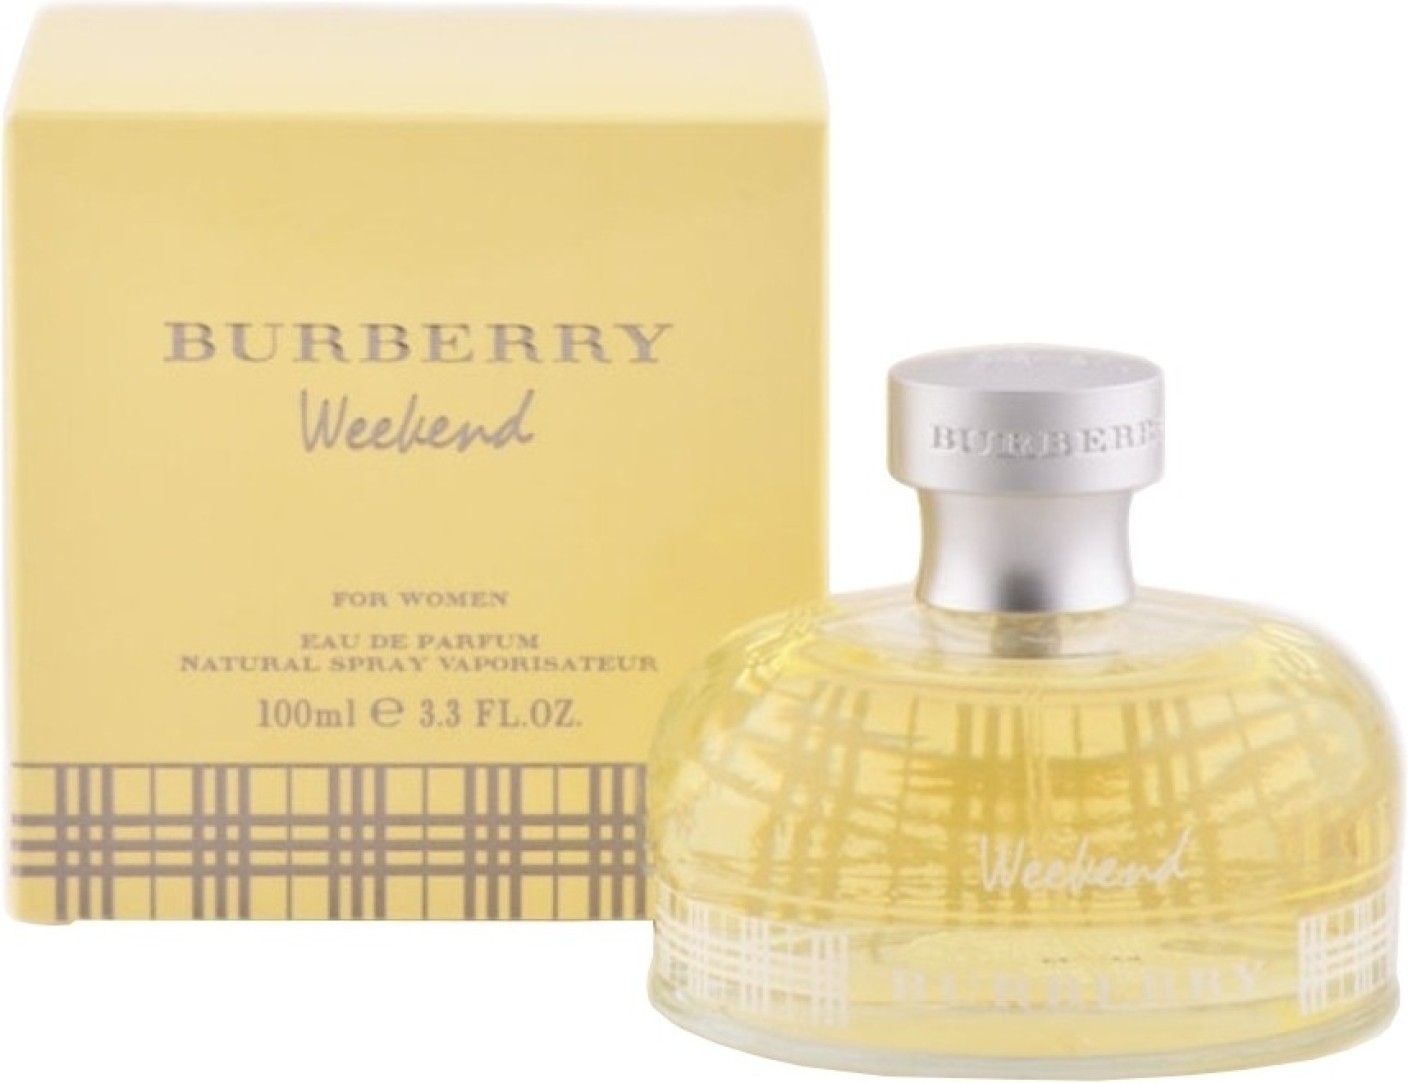 burberry weekend perfume boots